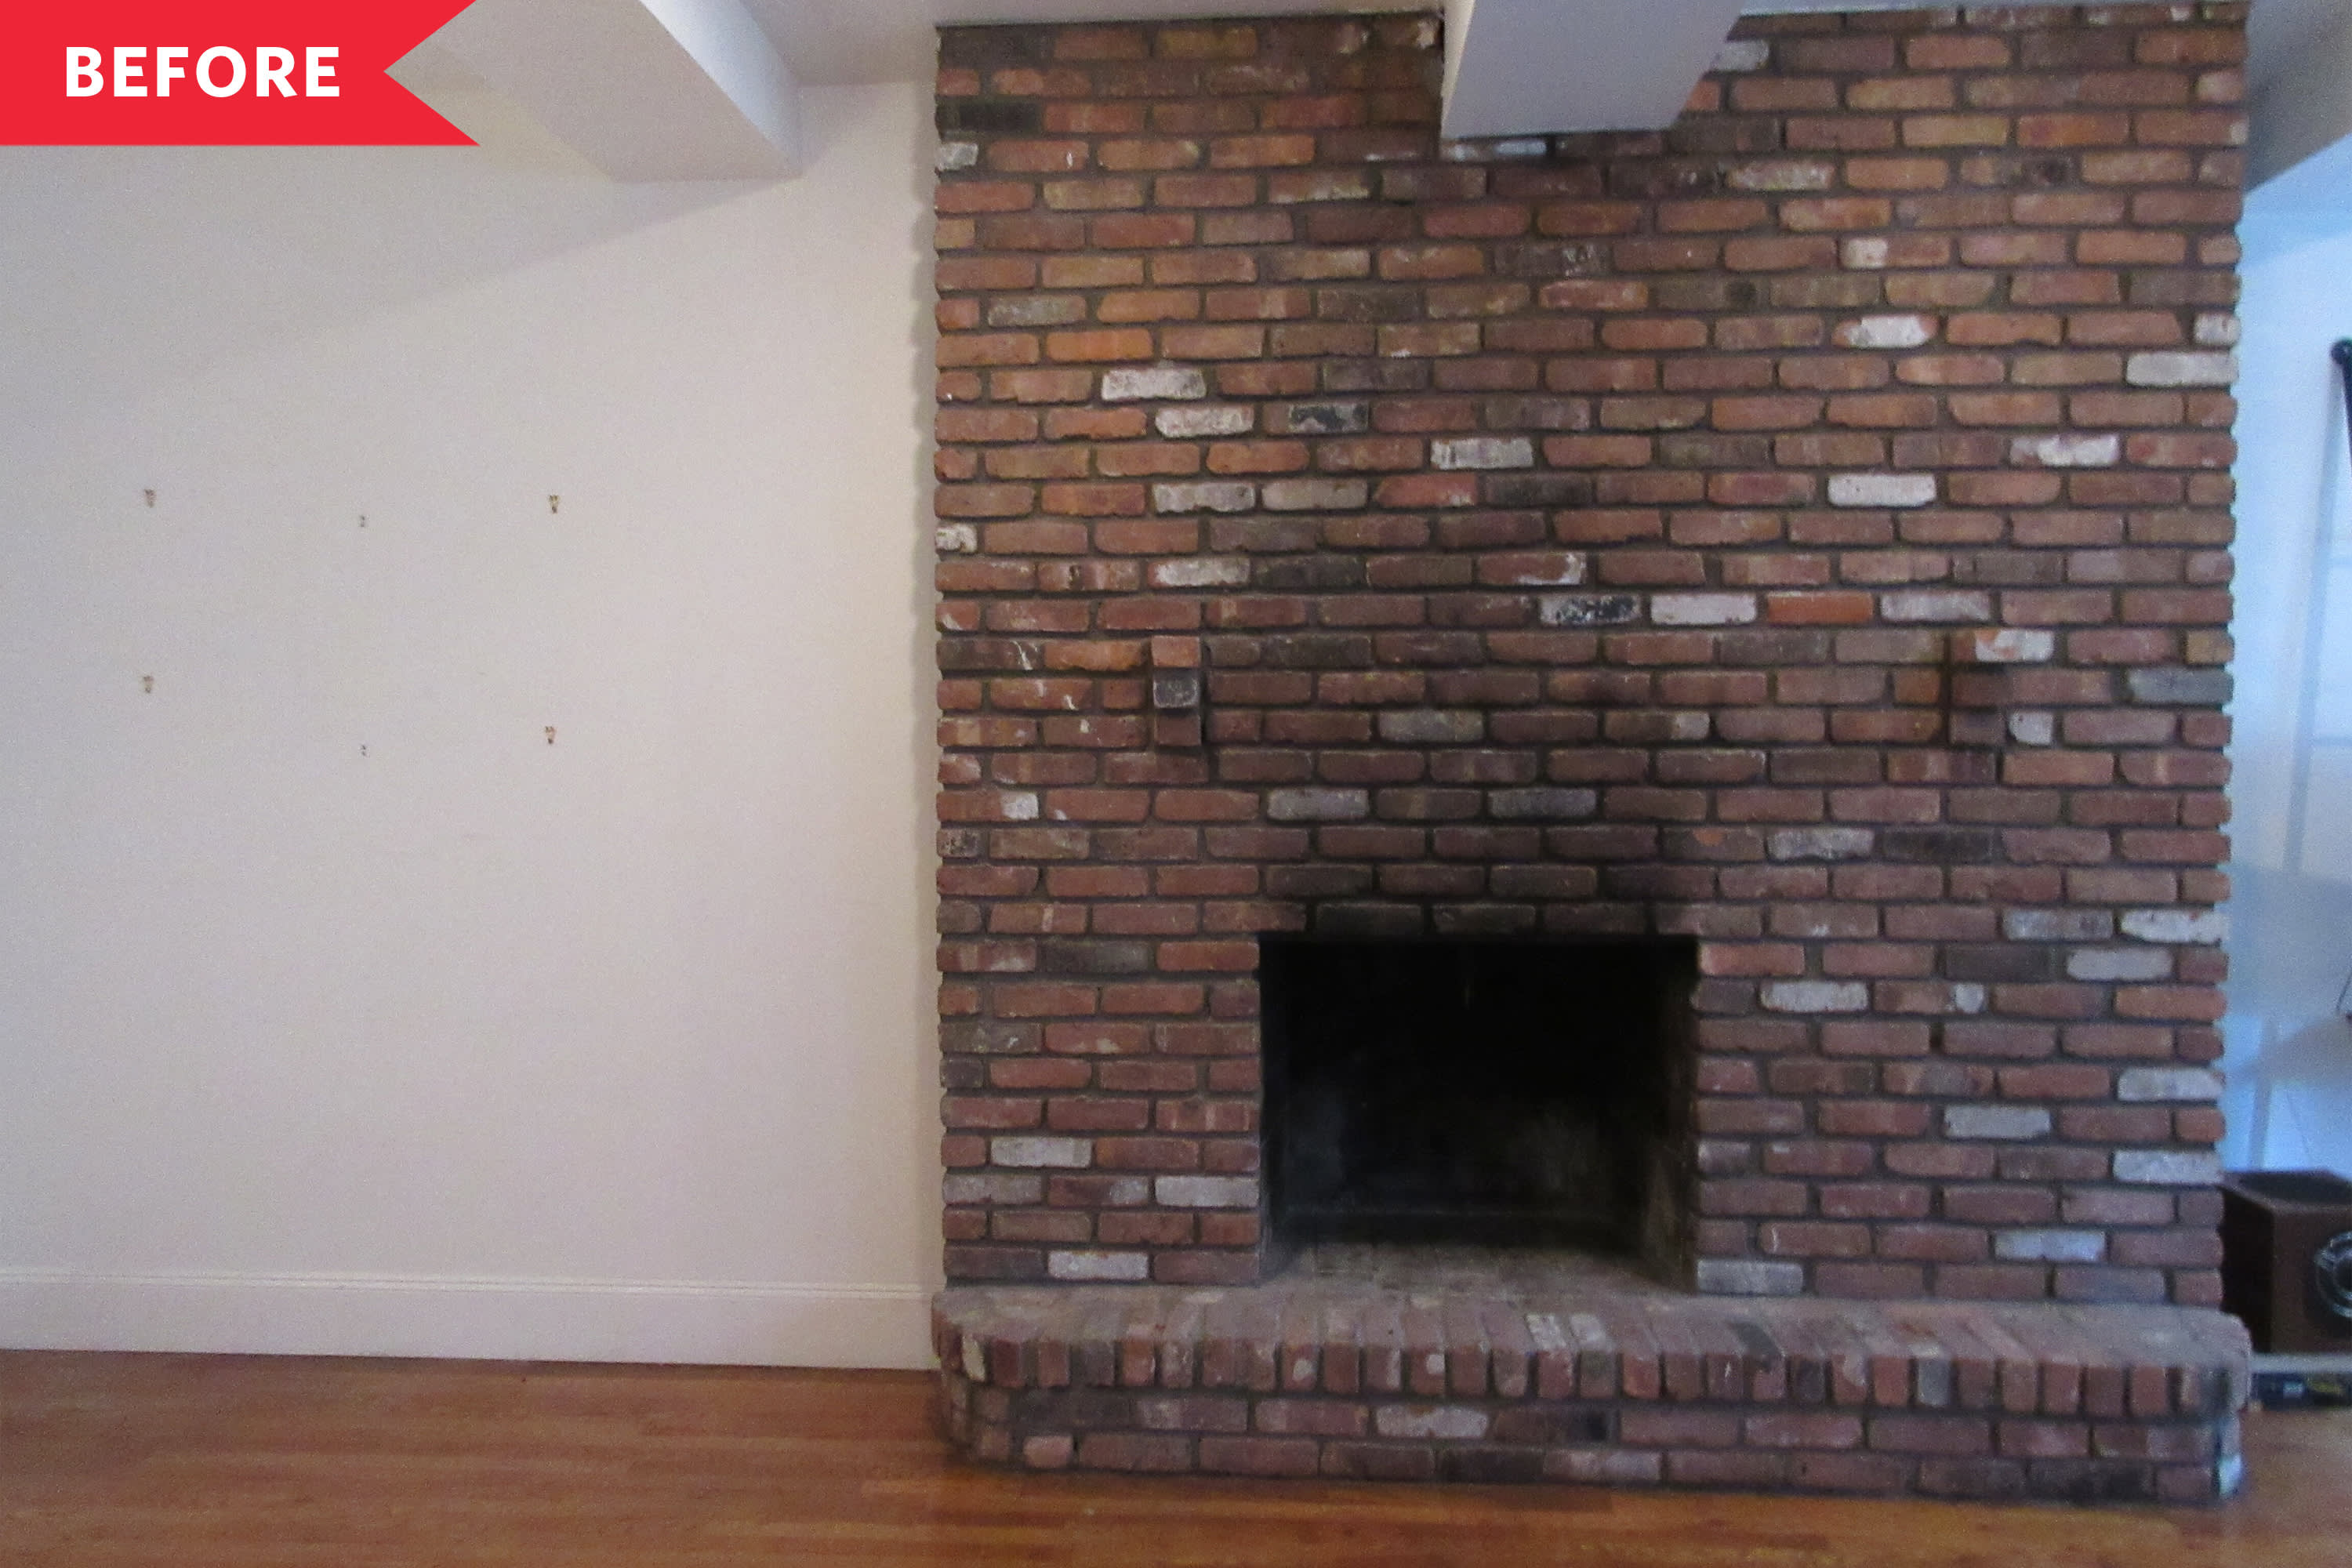 How To Paint a Brick Fireplace - This Old House